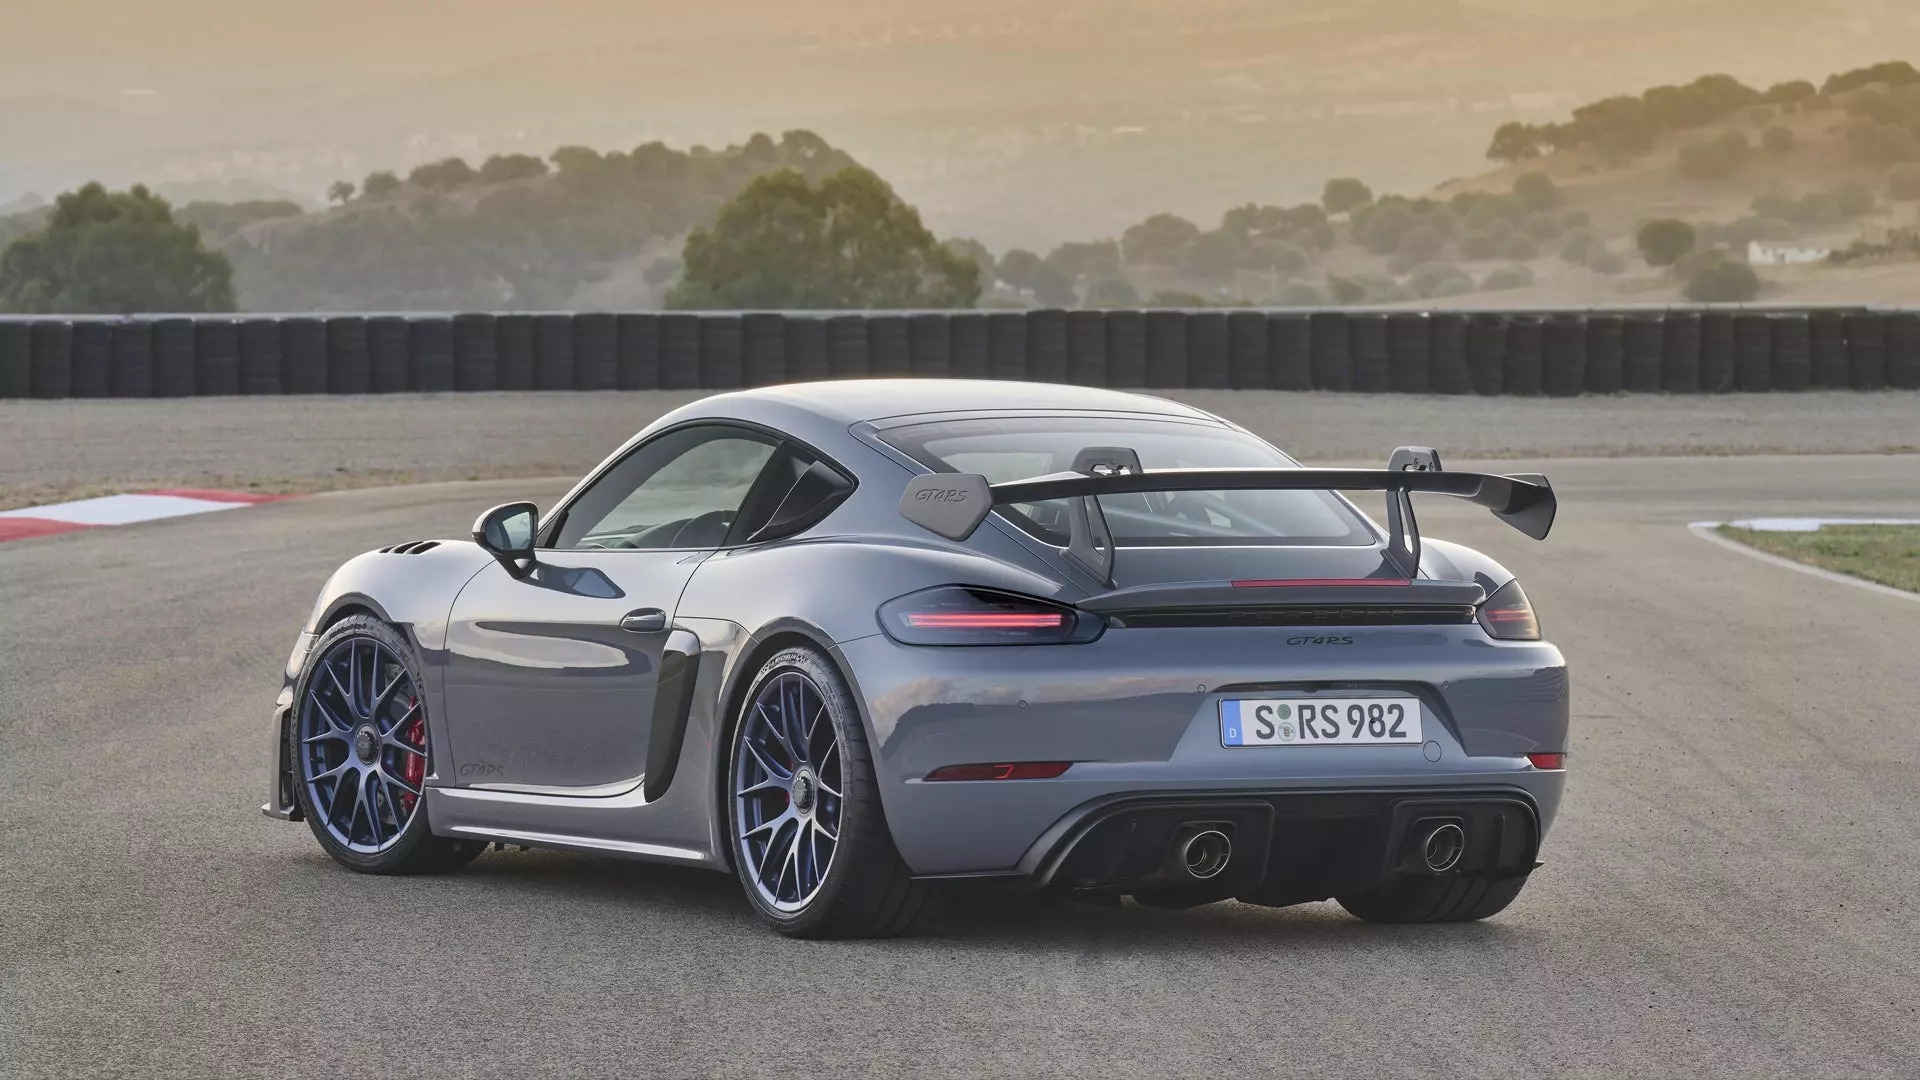 The GT4 RS Cayman Is in Serious Danger of Becoming the Coolest New Porsche